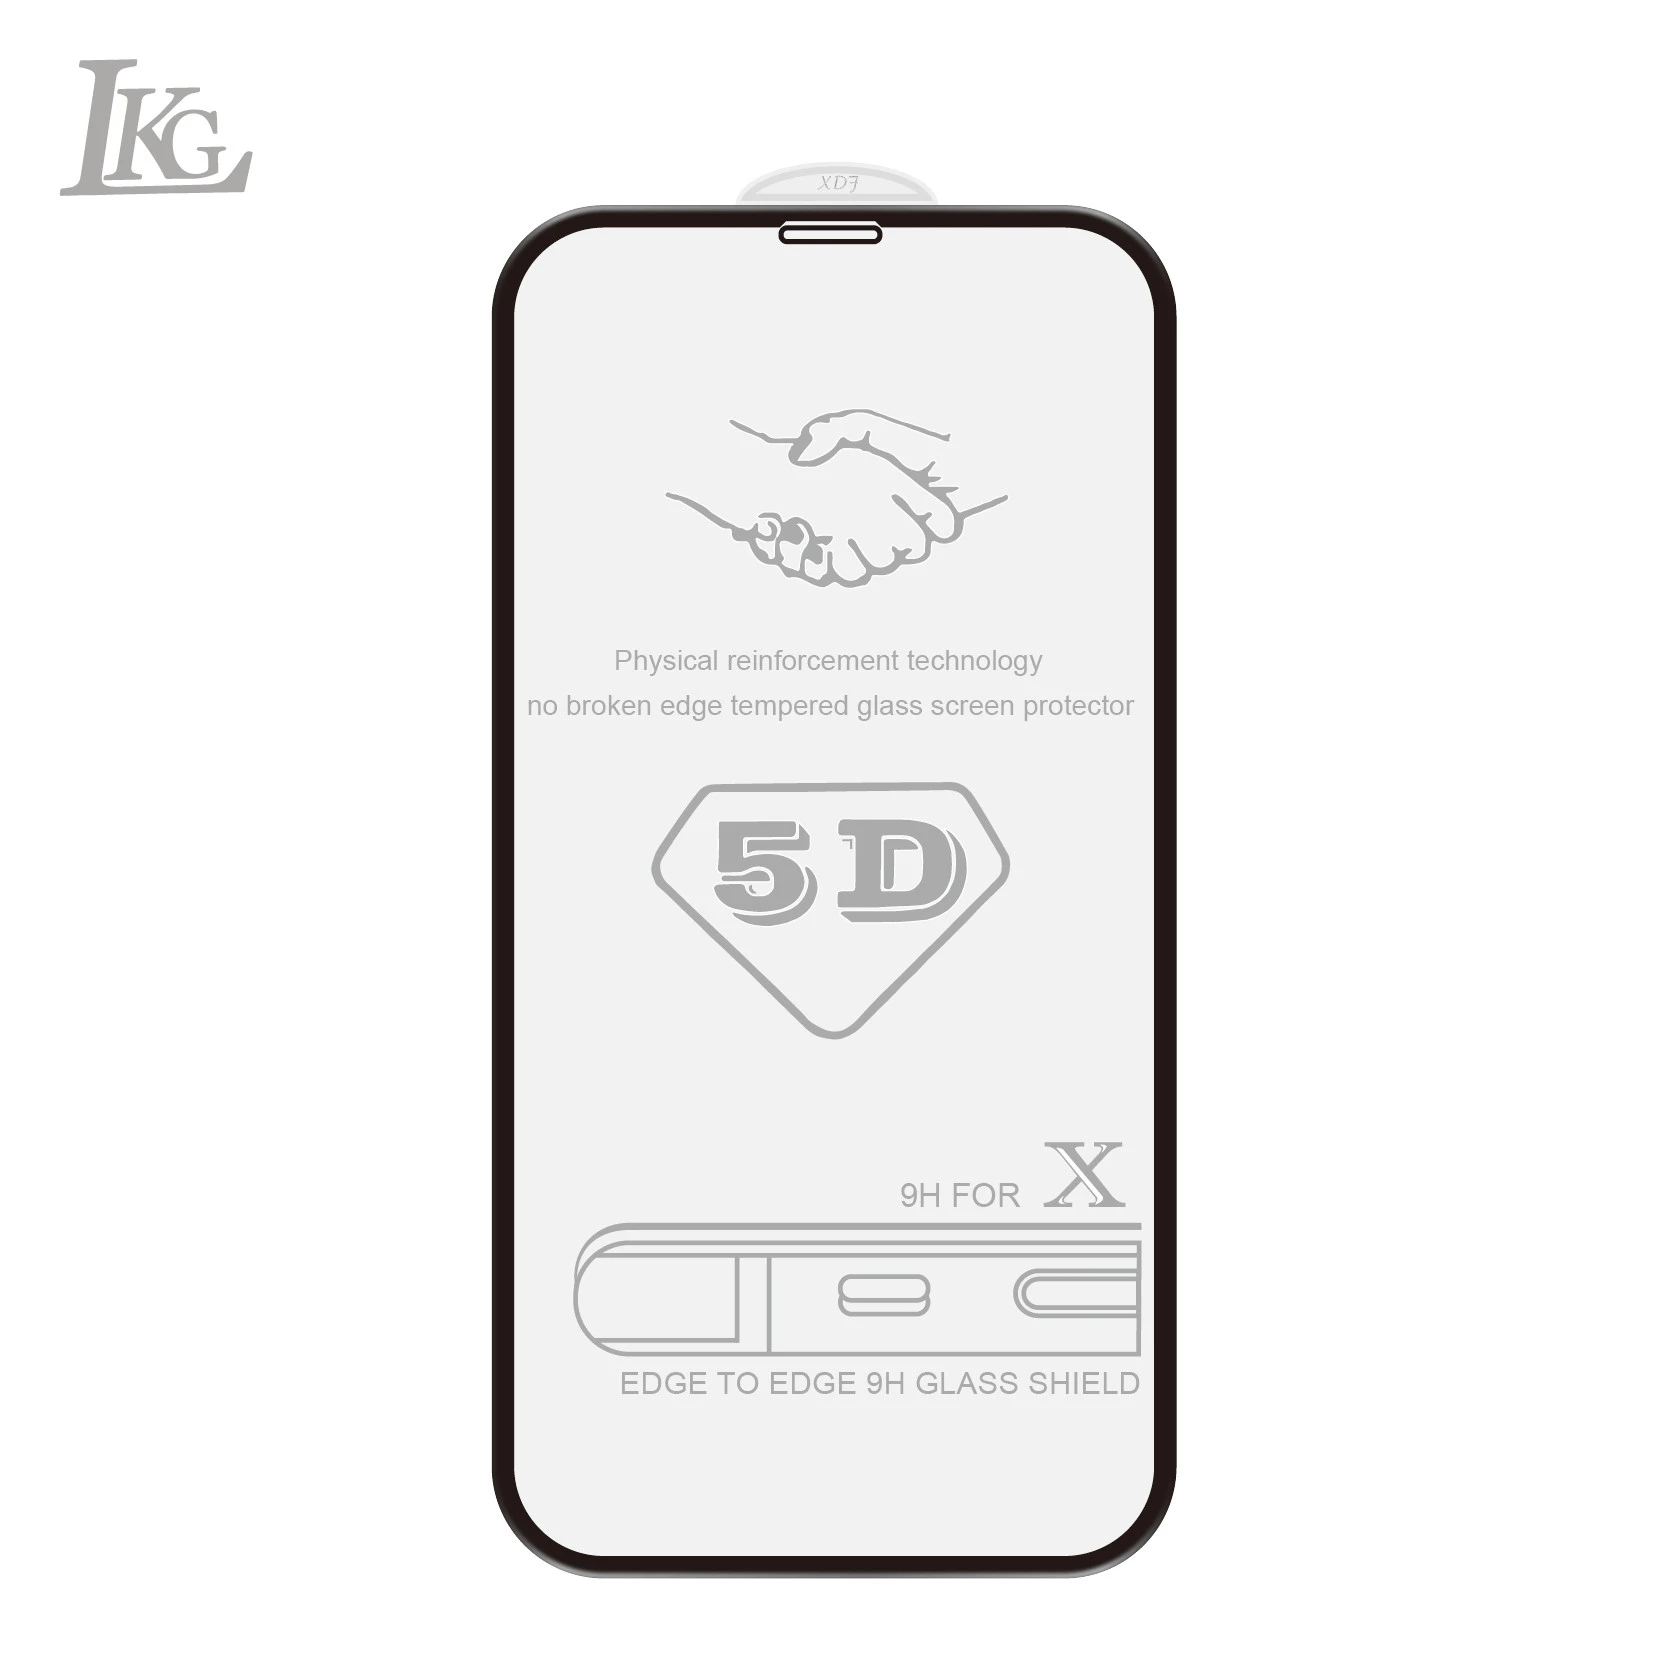 Exquisite Workmanship 5D Cold Carving Screen Protector Tempered Glass Protector for IPhone Series